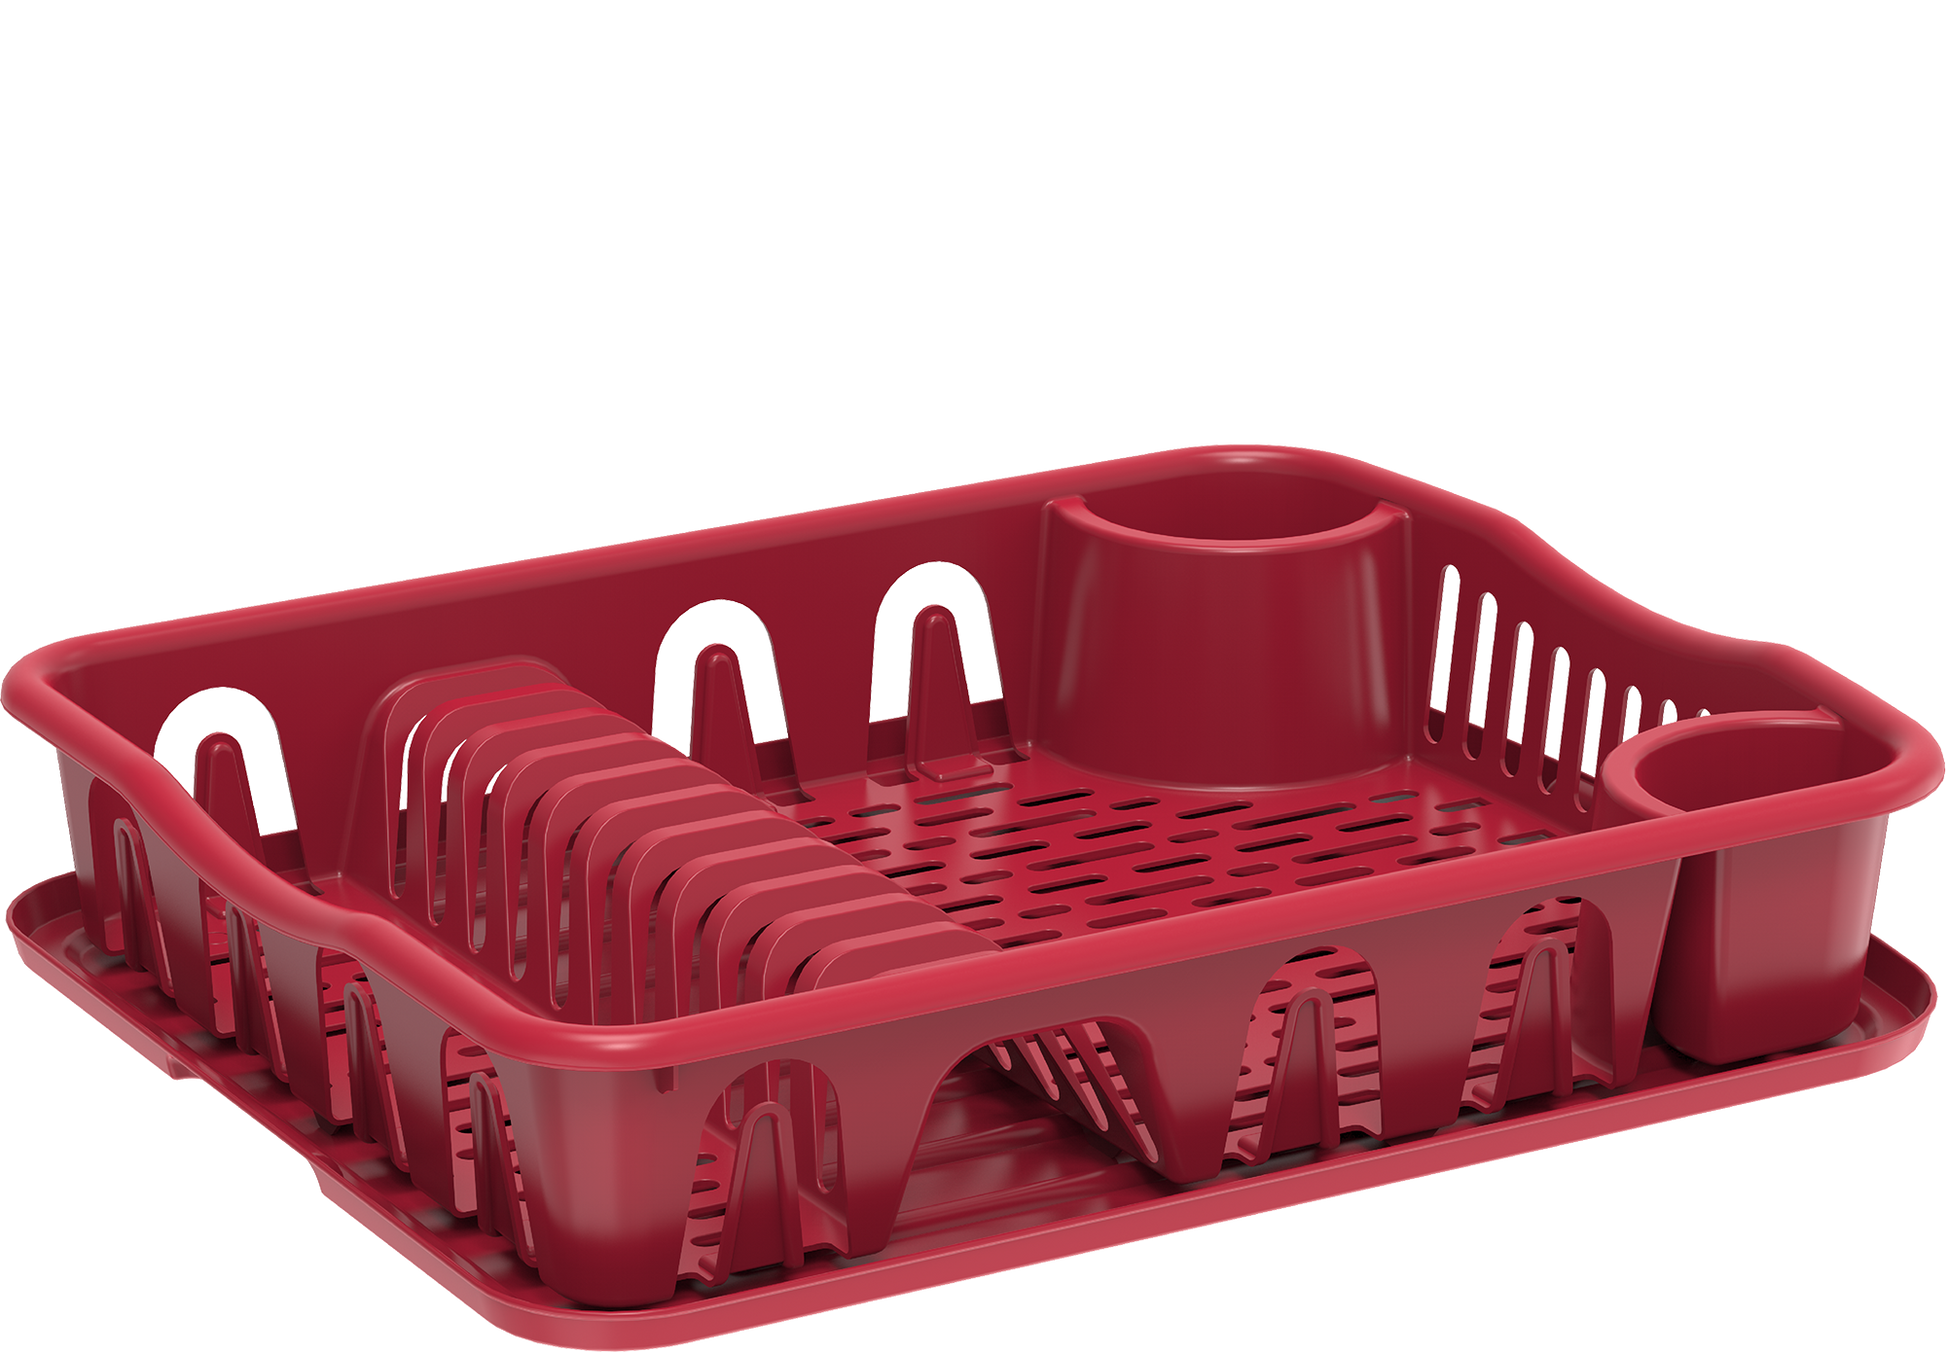 Large Dish Rack with Drainer - Cosmoplast Bahrain